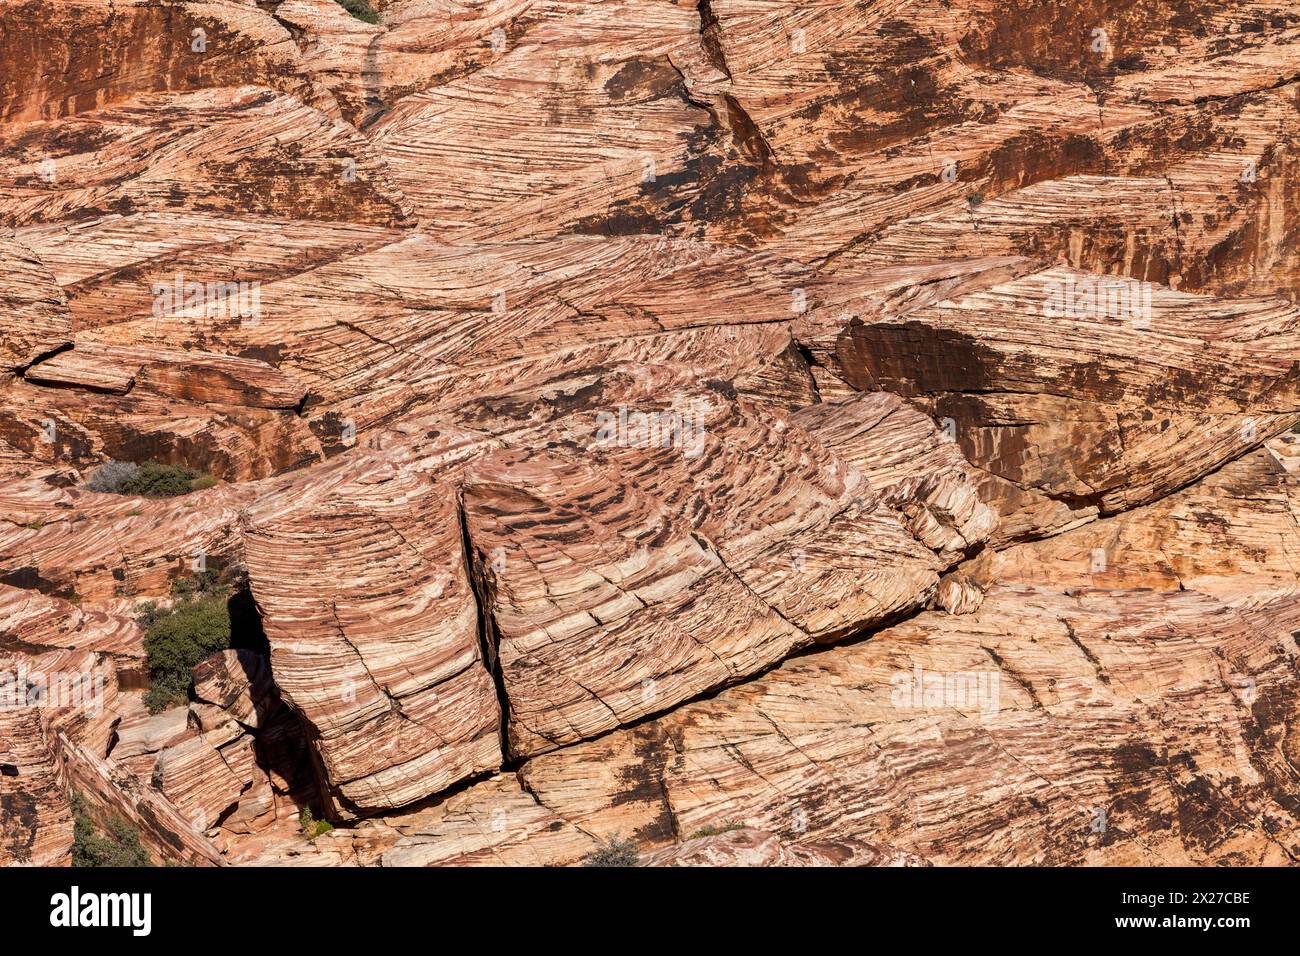 Red Rock Canyon, Nevada.  Calico Hills, Cross-bedding in Aztec Sandstone, from Ancient Sand Dunes. Stock Photo